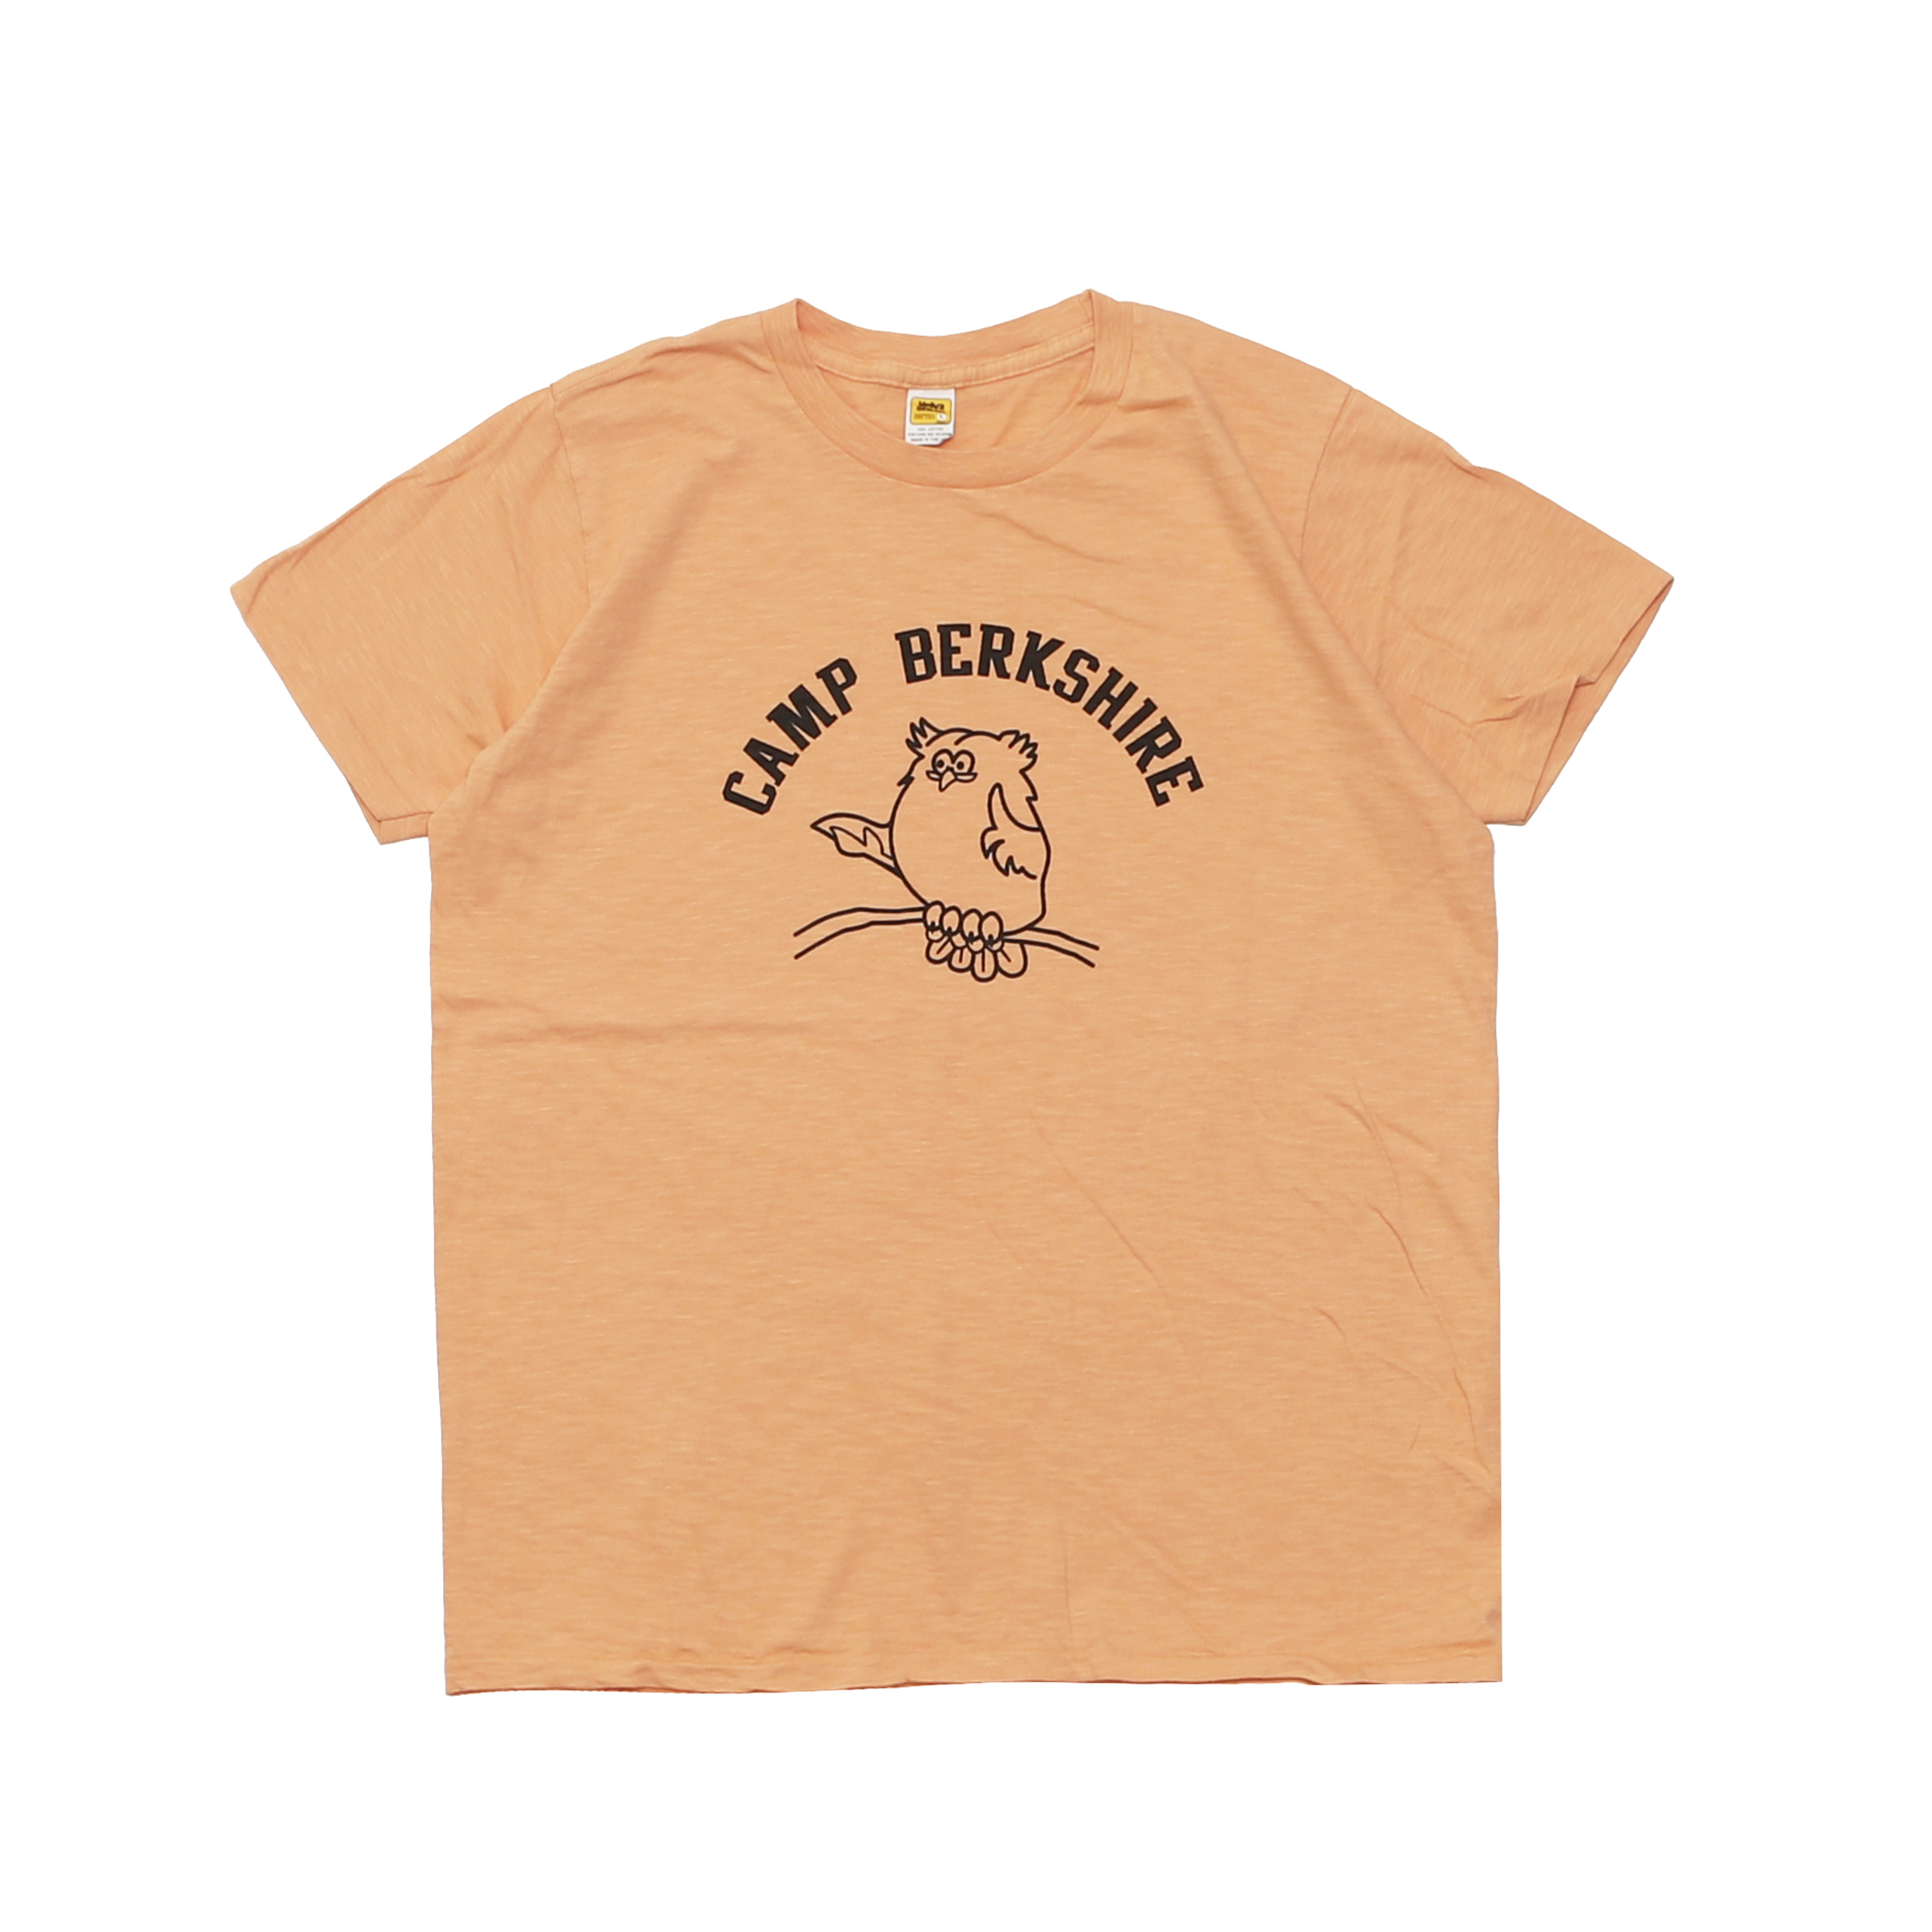 PRINTED S/S TEE - CAMP APRICOT